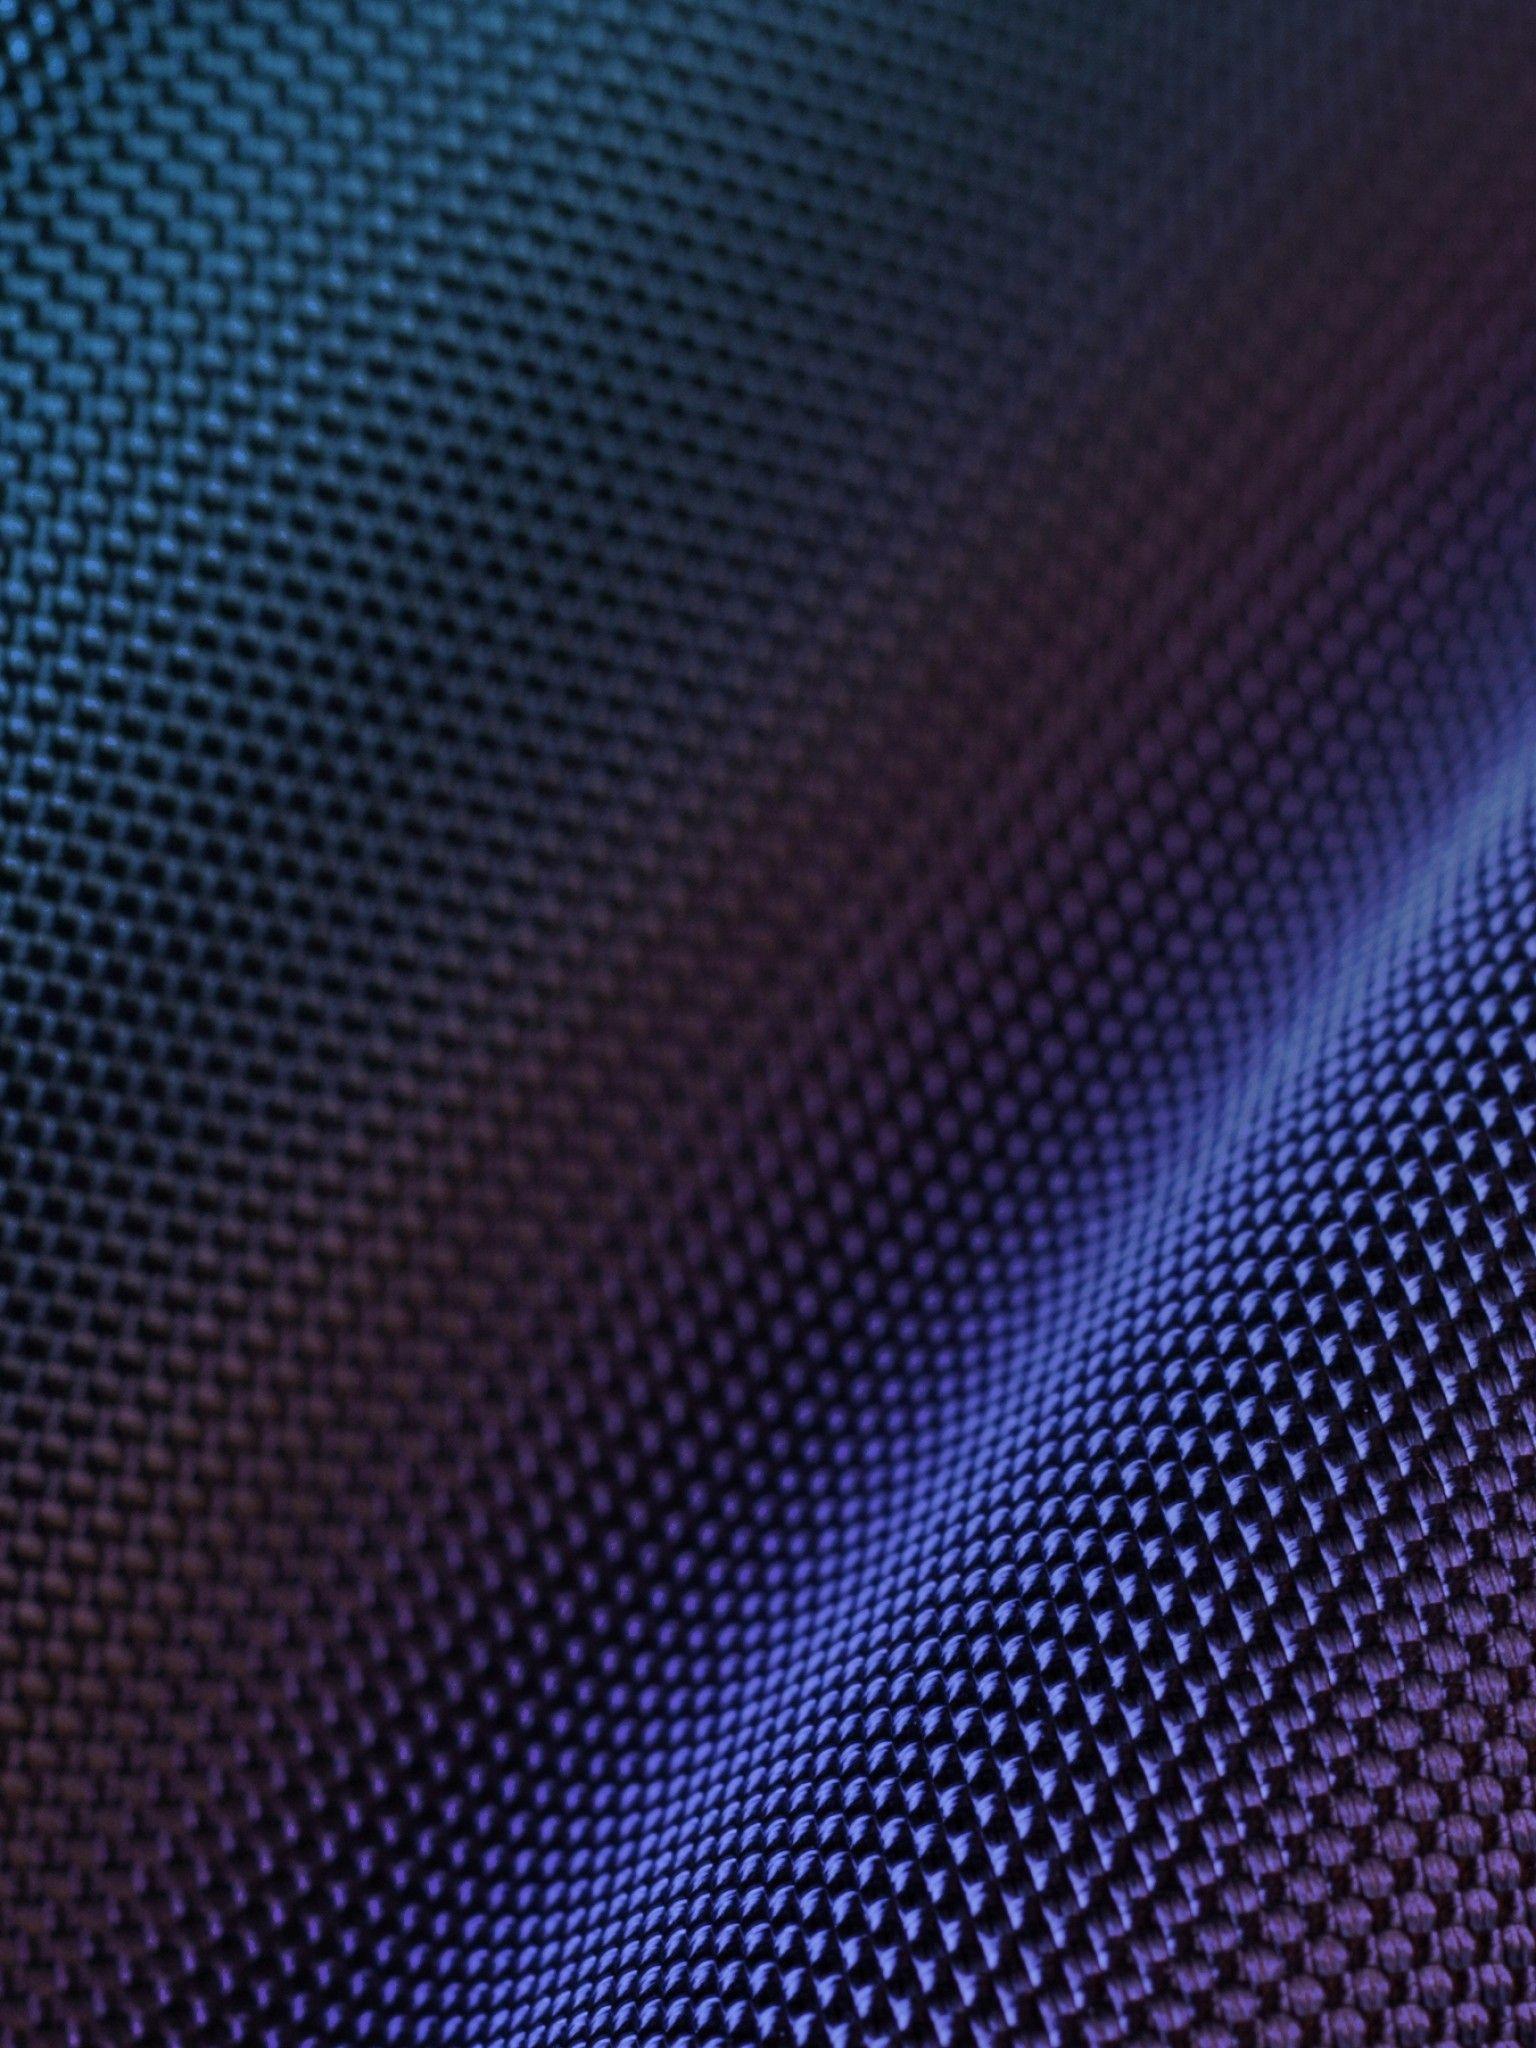 Featured image of post Red Carbon Fiber Iphone Wallpaper Daily so be sure to check back often